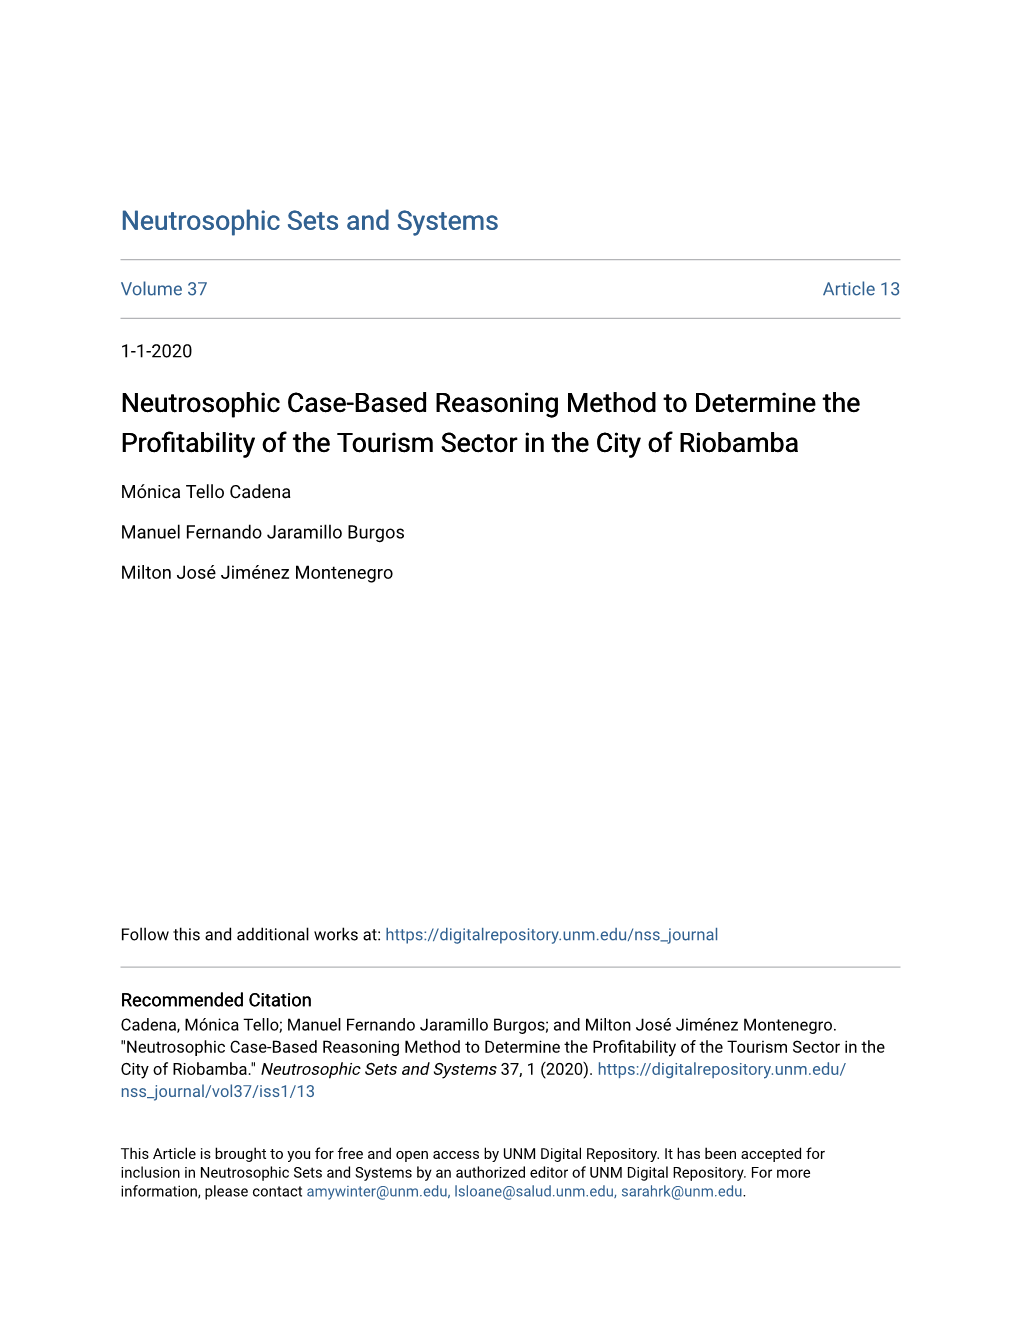 Neutrosophic Case-Based Reasoning Method to Determine the Profitability of the Ourismt Sector in the City of Riobamba